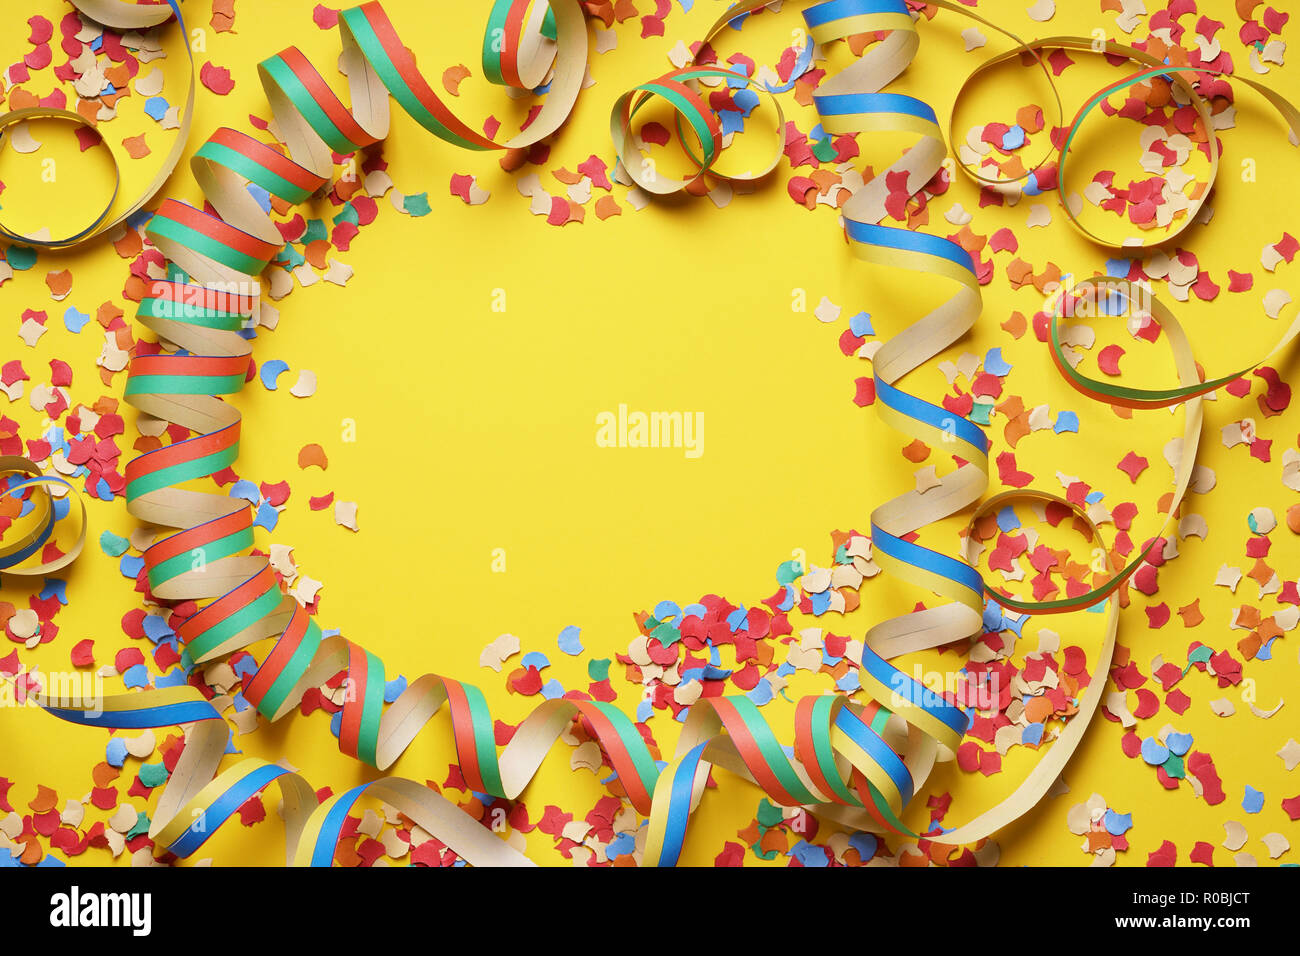 confetti and paper streamer frame on yellow background Stock Photo